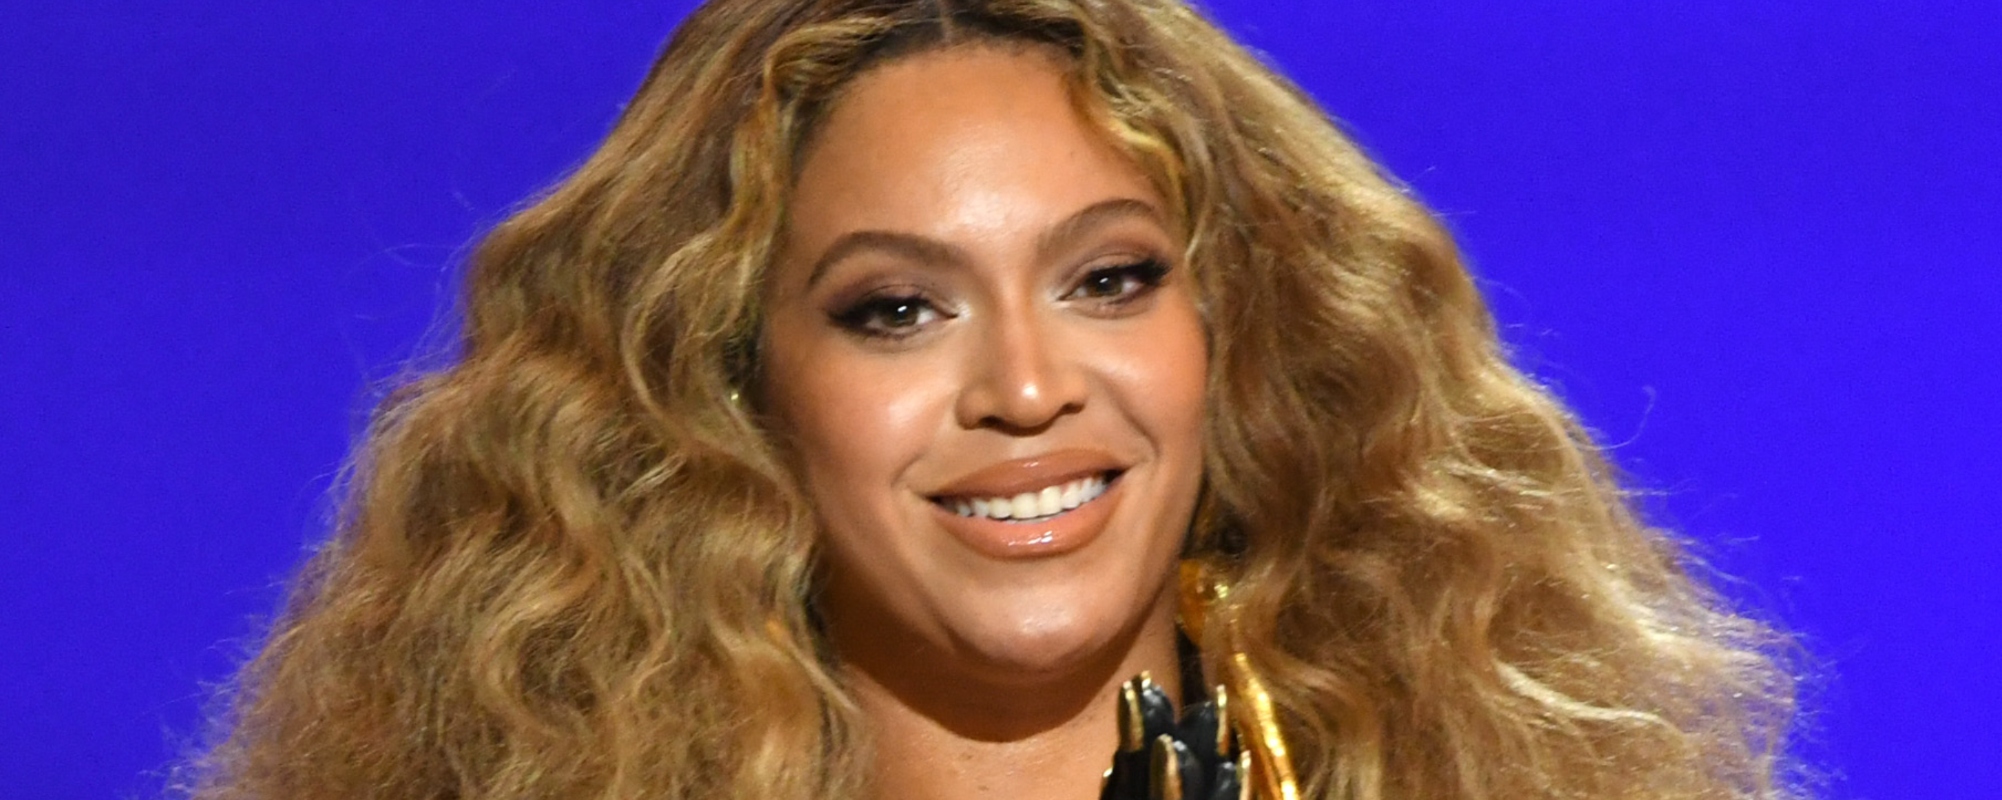 Beyoncé Makes History, Earns Biggest Boxscore Earnings of the Year